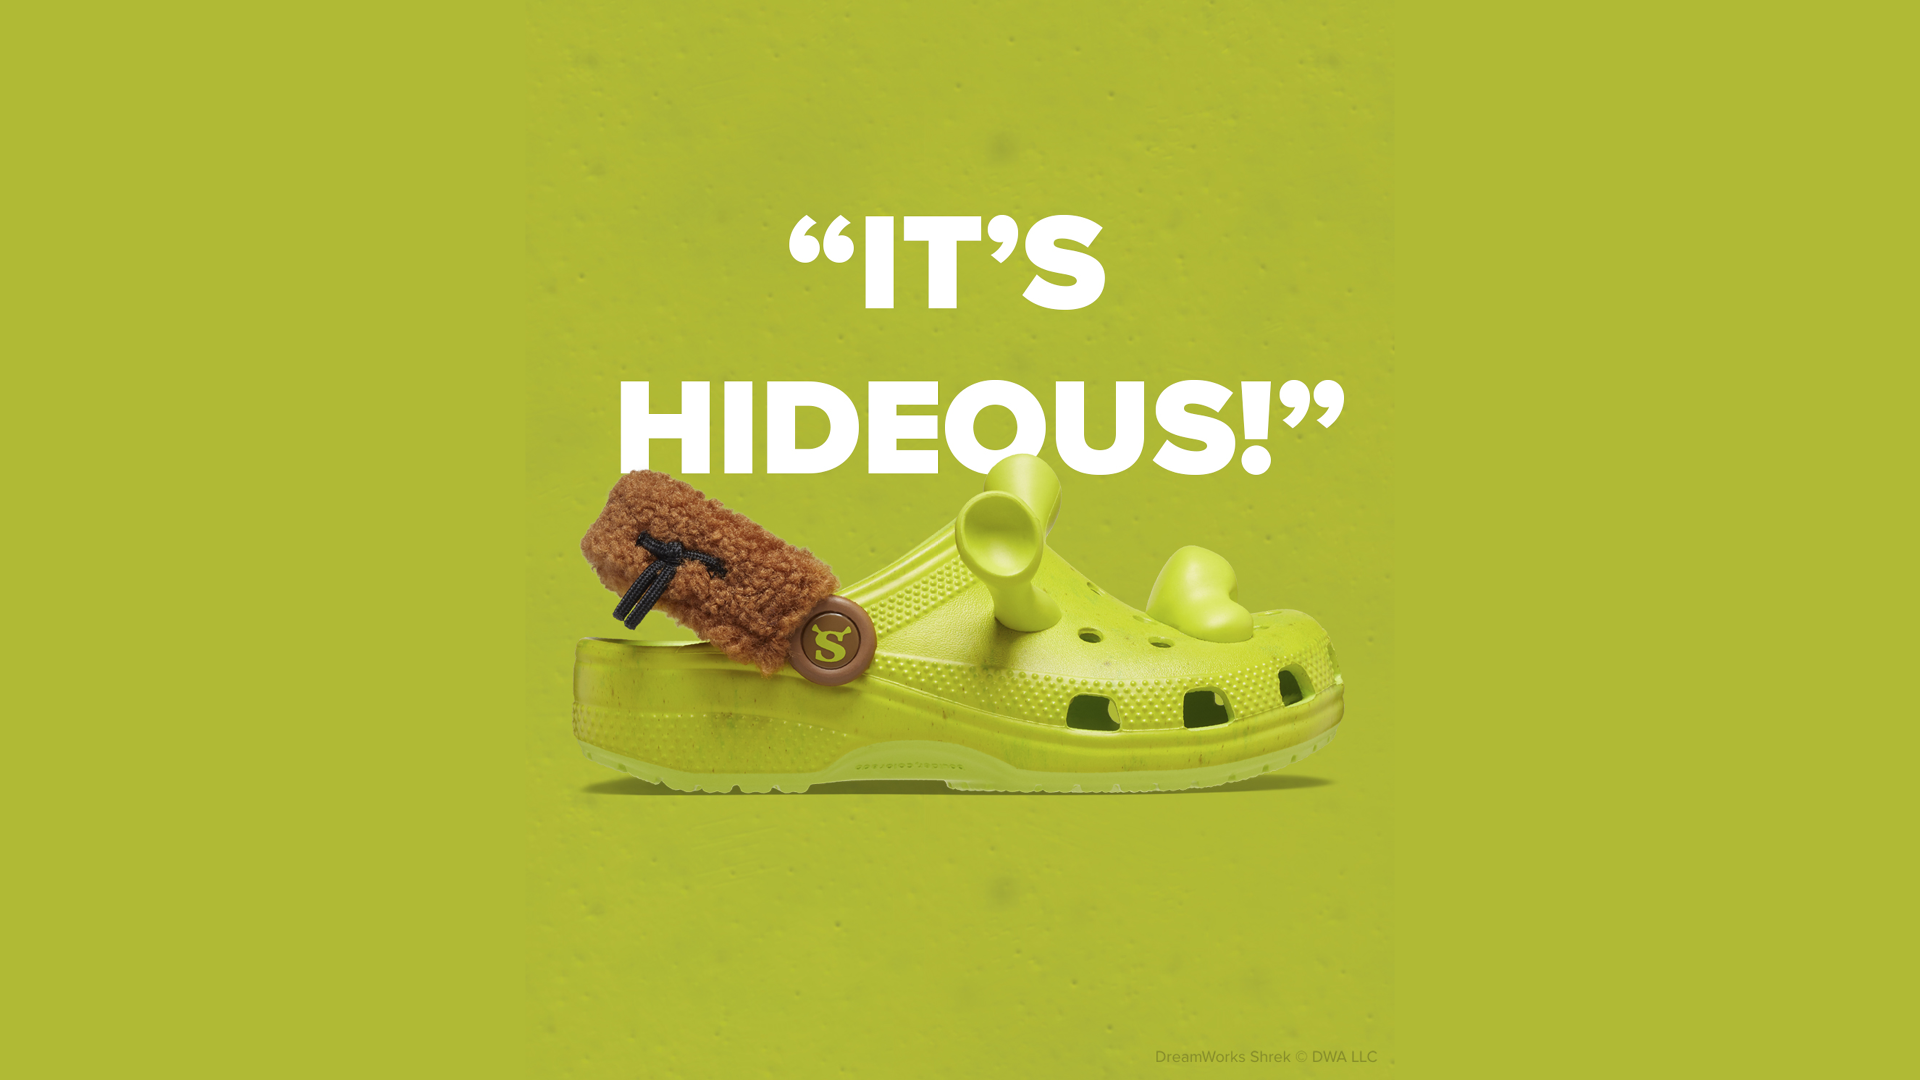 Shrek Will Have Crocs Inspired by His Upcoming Fifth Movie